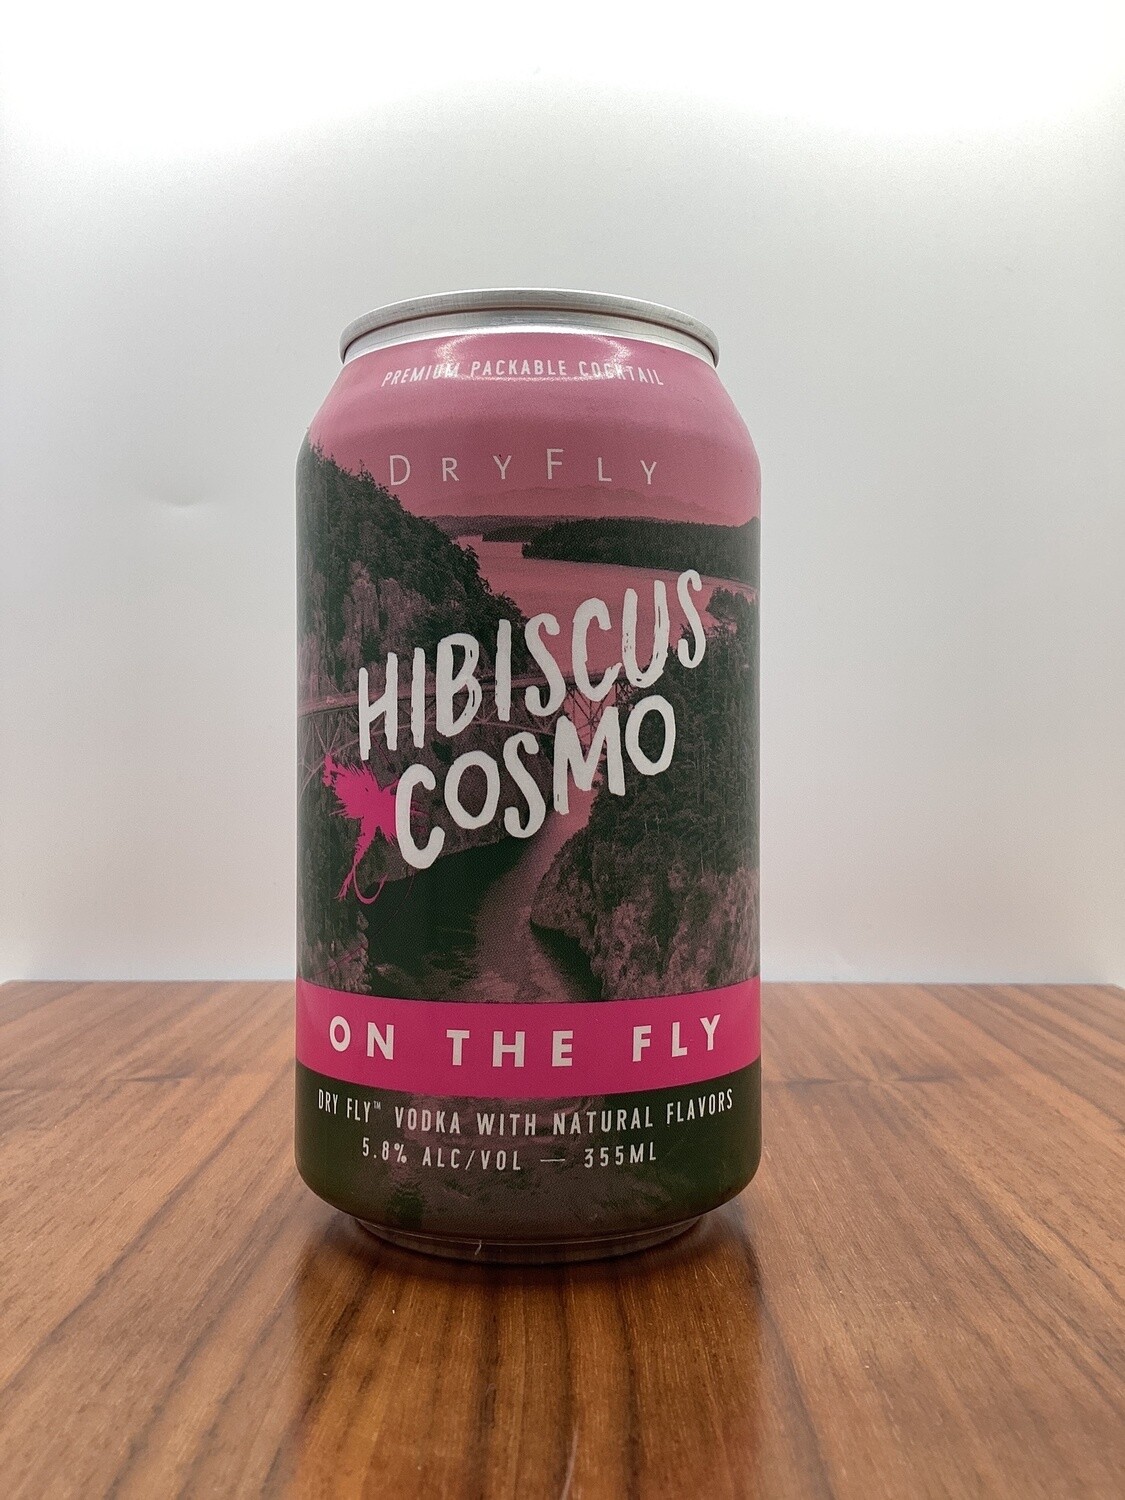 Dry Fly, Hibiscus Cosmo